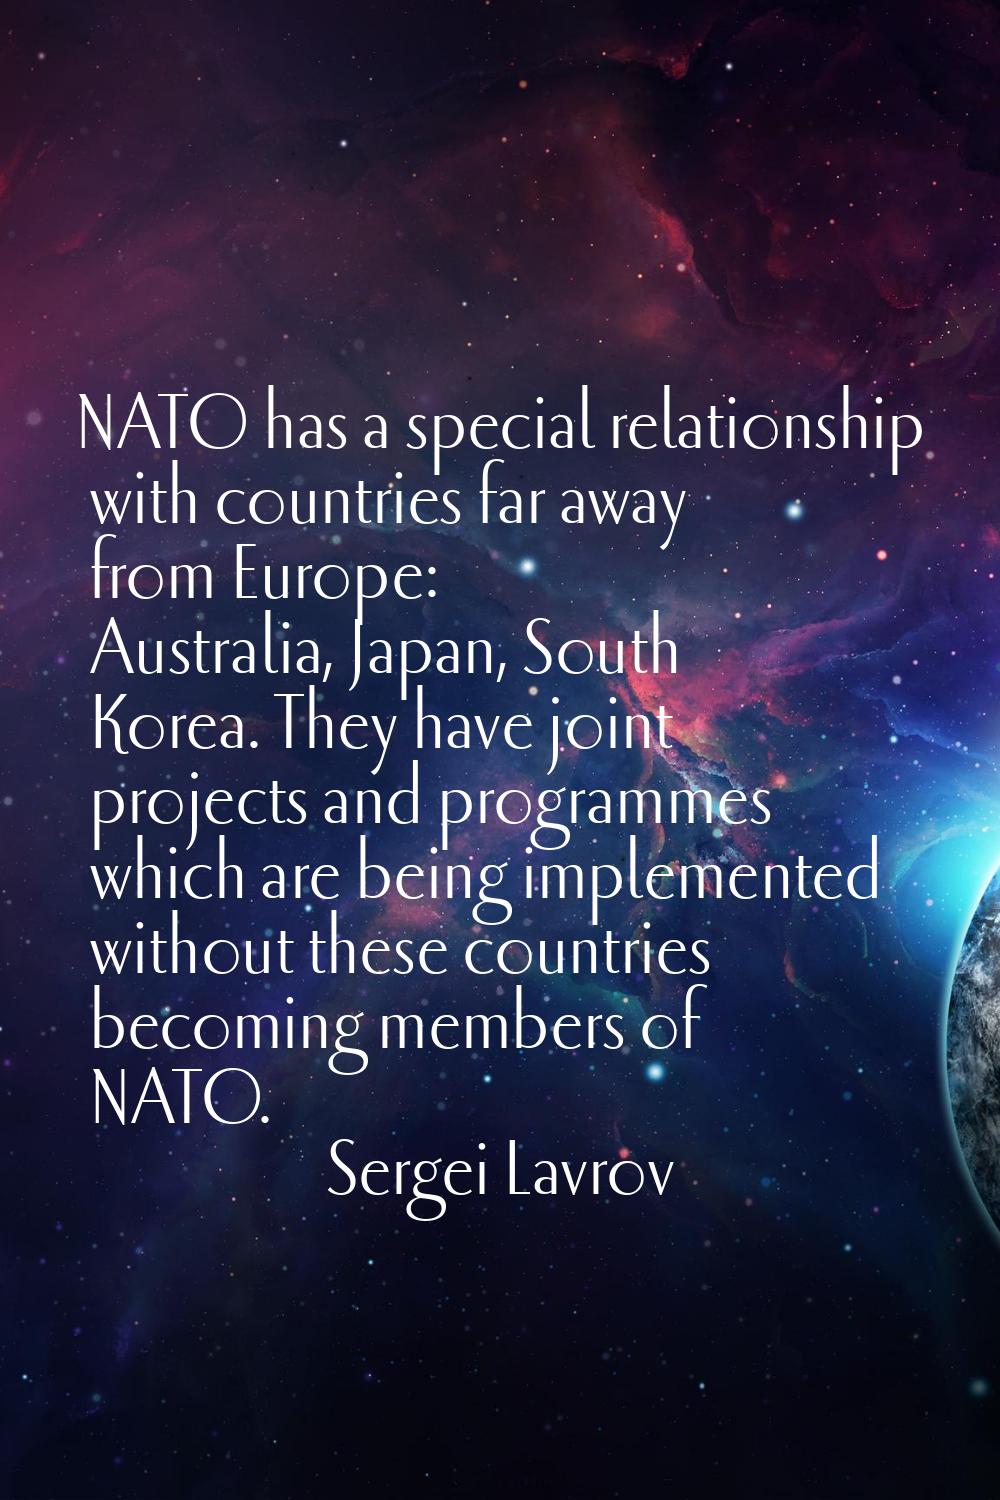 NATO has a special relationship with countries far away from Europe: Australia, Japan, South Korea.